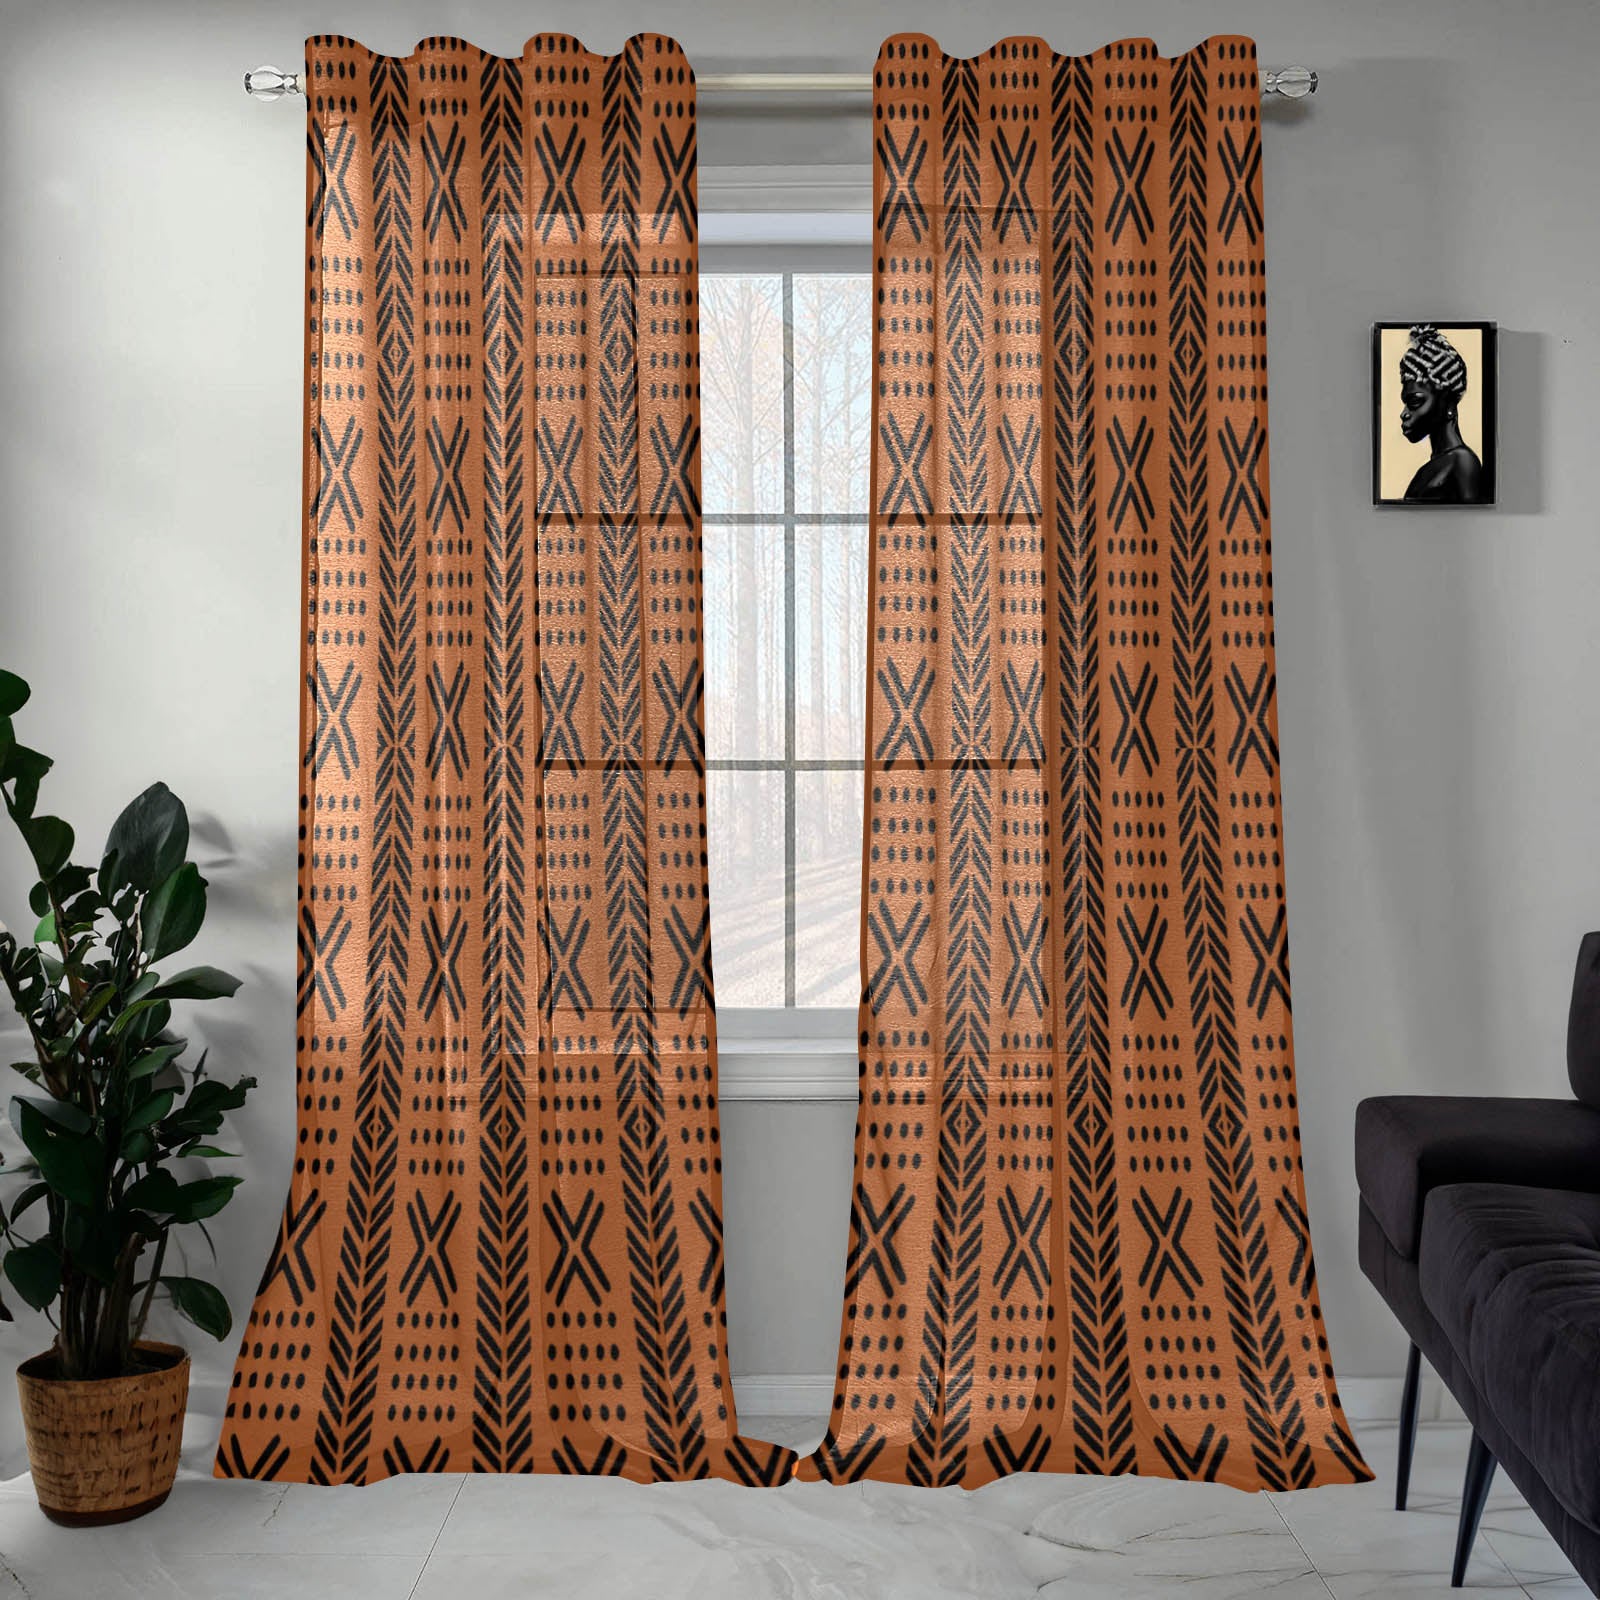 Brown African Print Guaze Curtain Mudcloth (Two Piece)- Bynelo